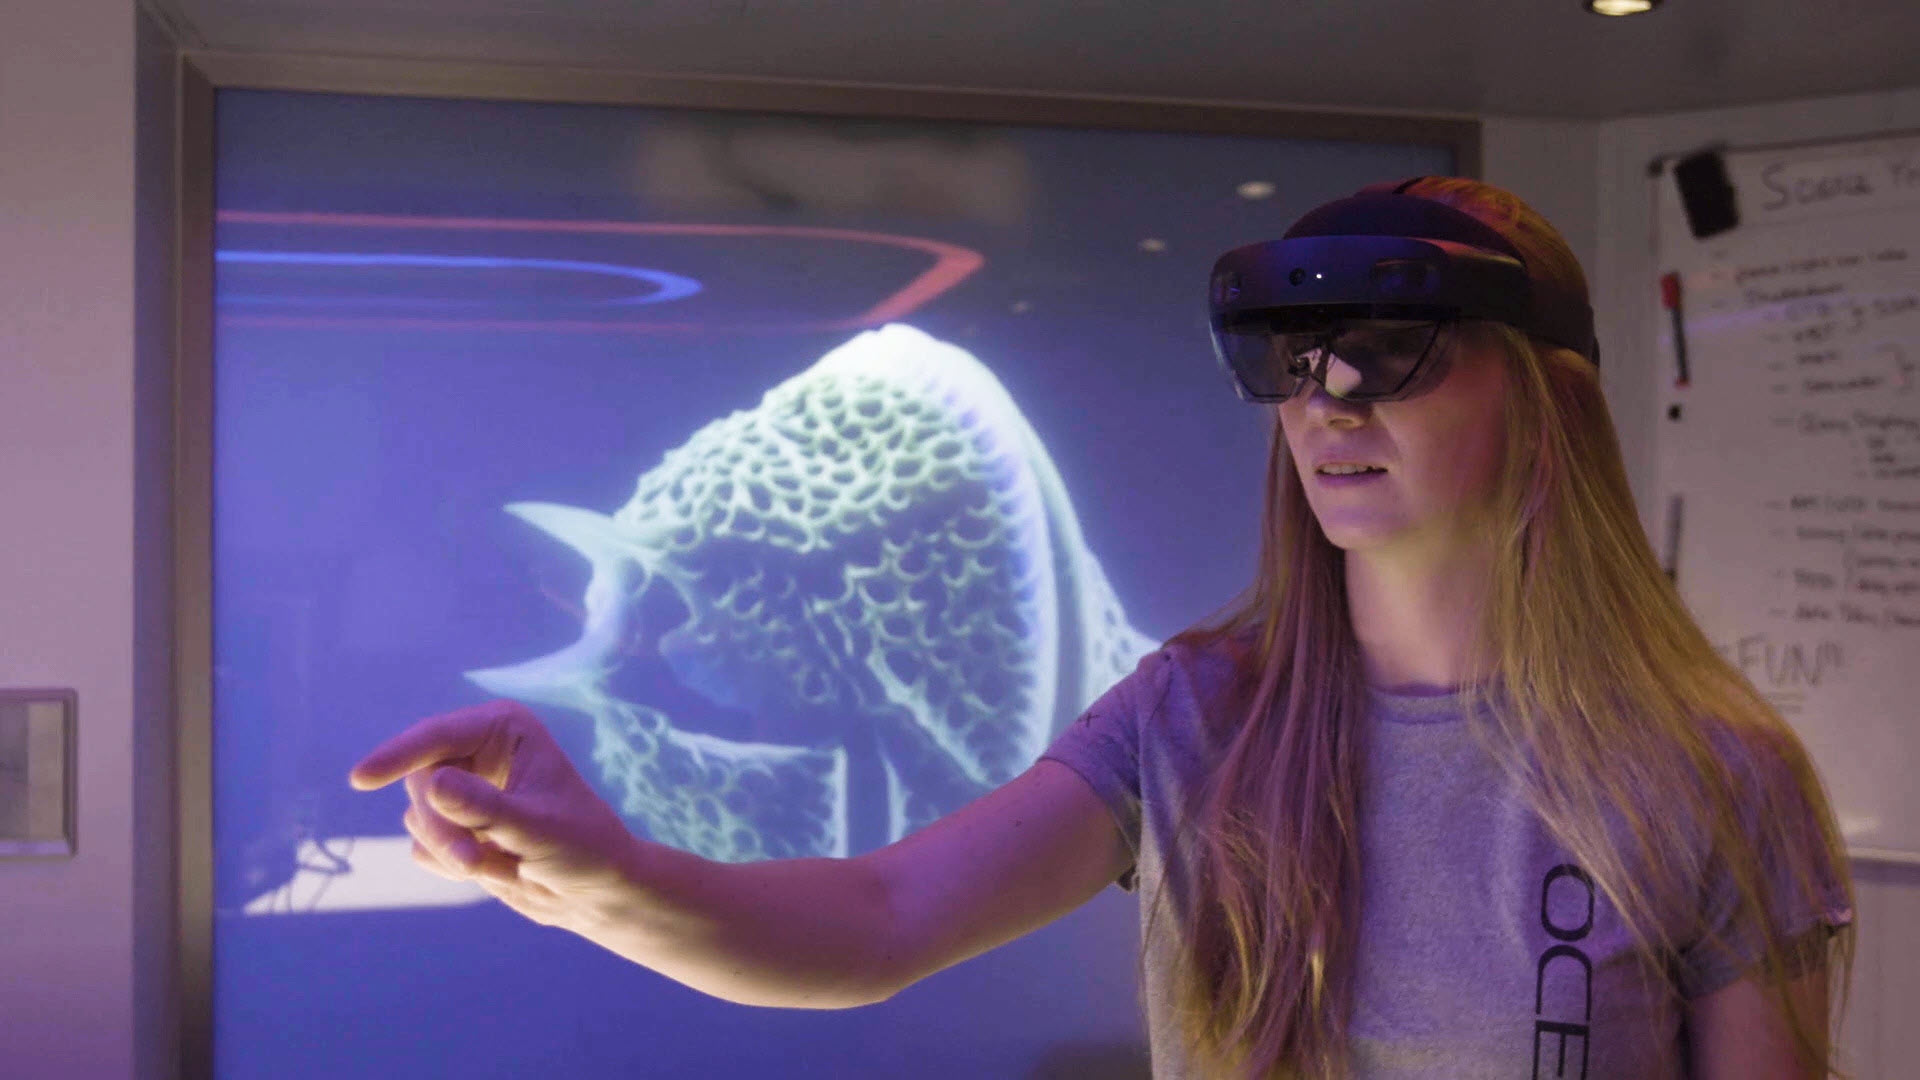 A woman wearing an OceanX shirt and a HoloLens interacts with an unseen hologram with an image of sea life in the background.